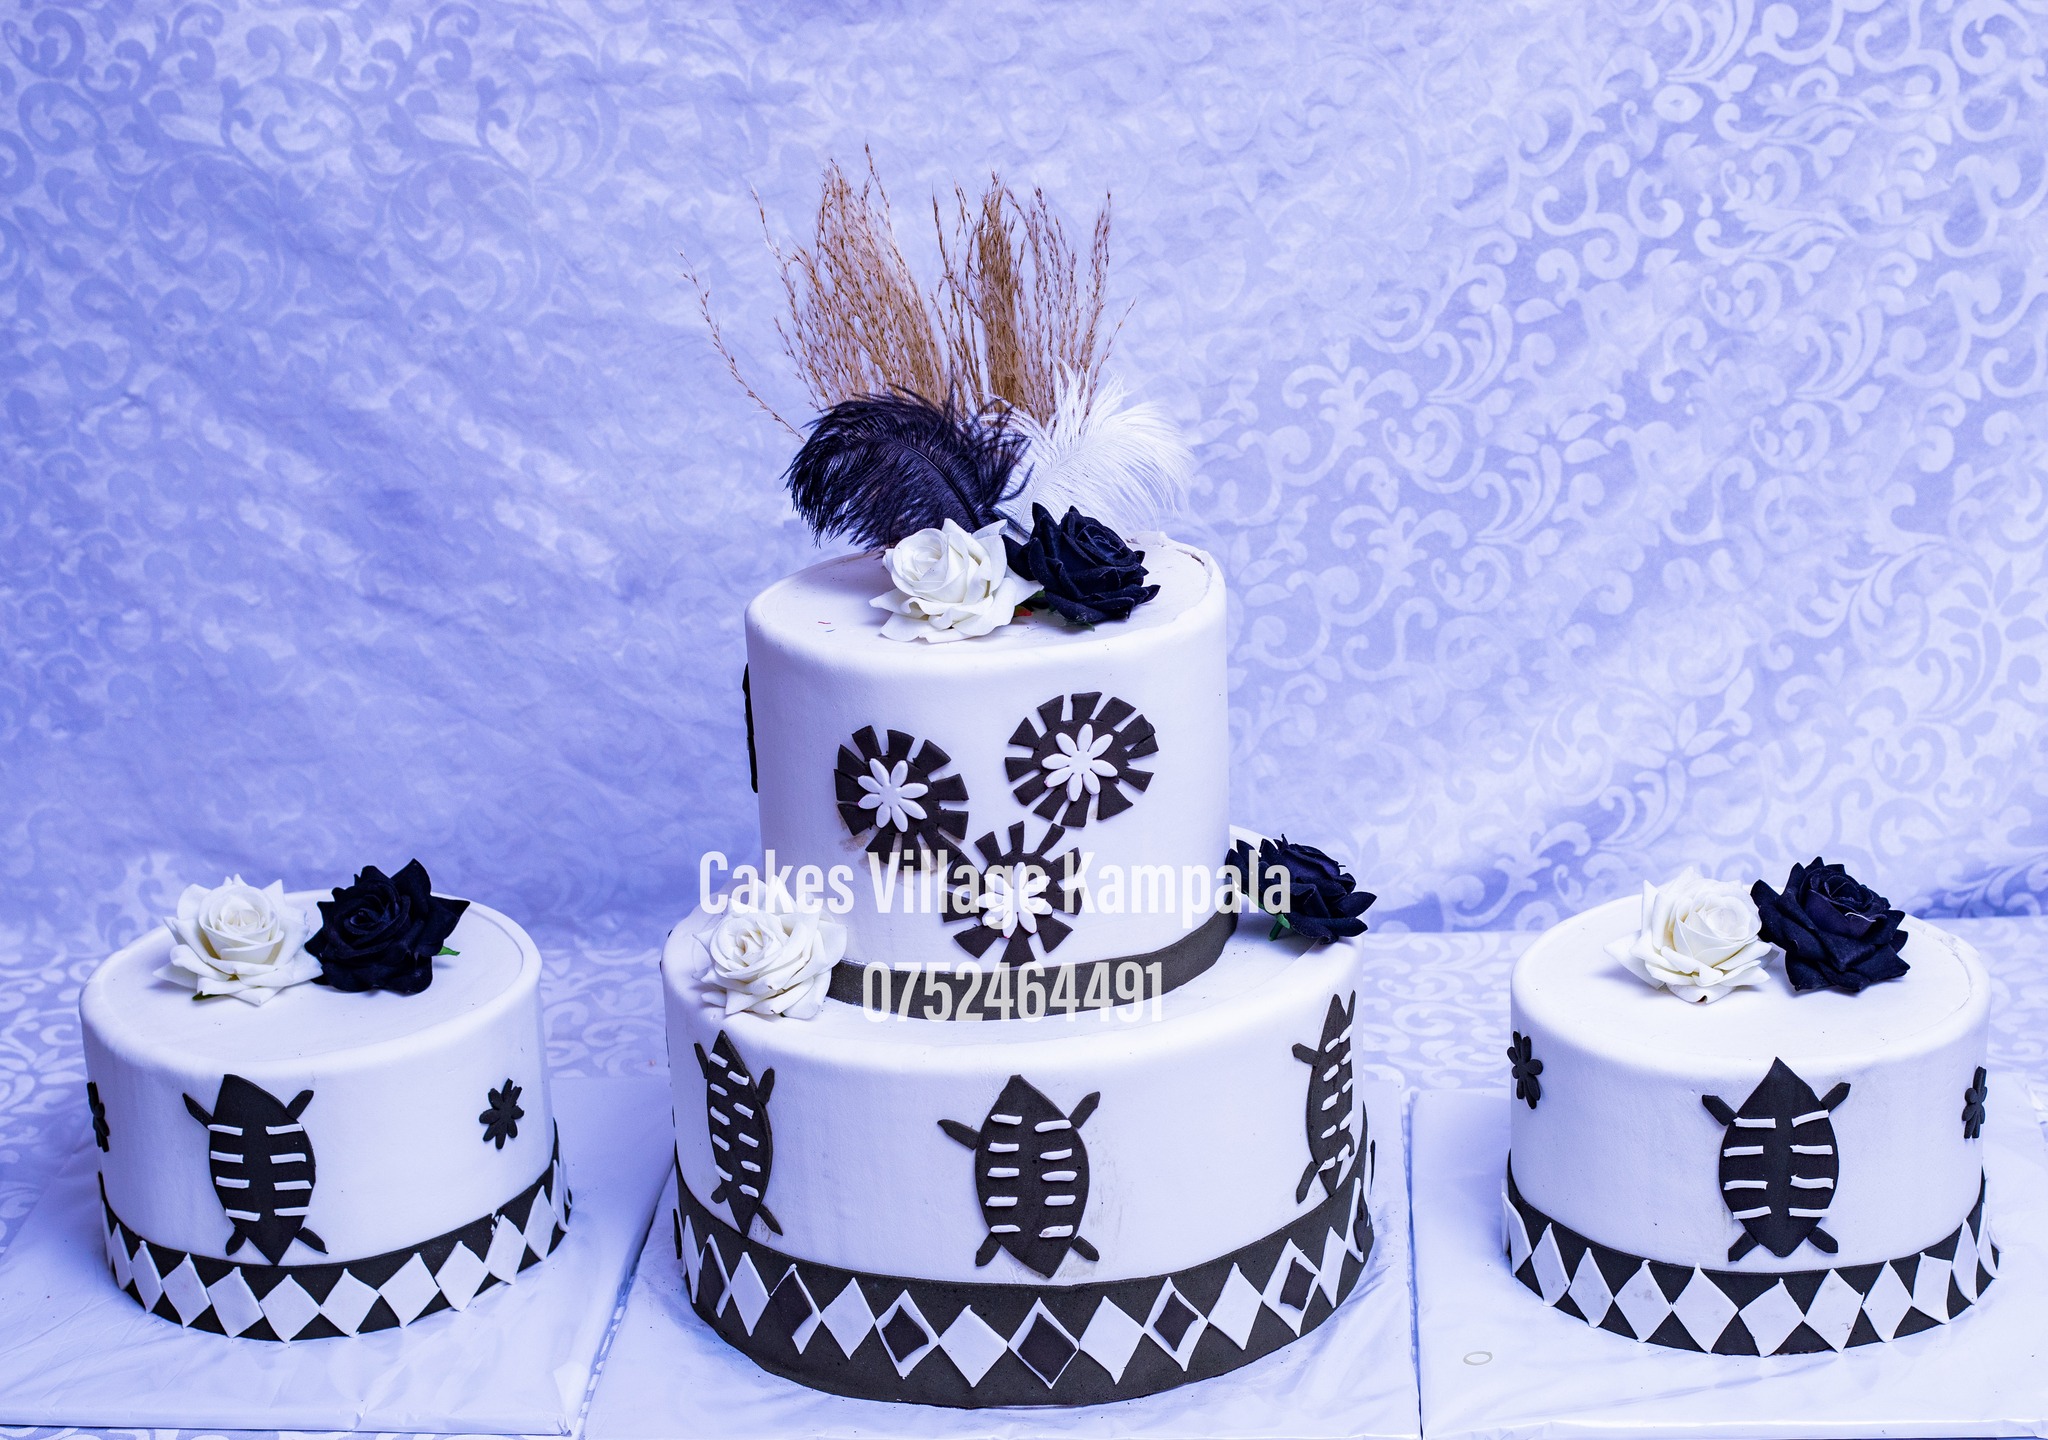 introduction cake with 2 give away cakes/side cakes